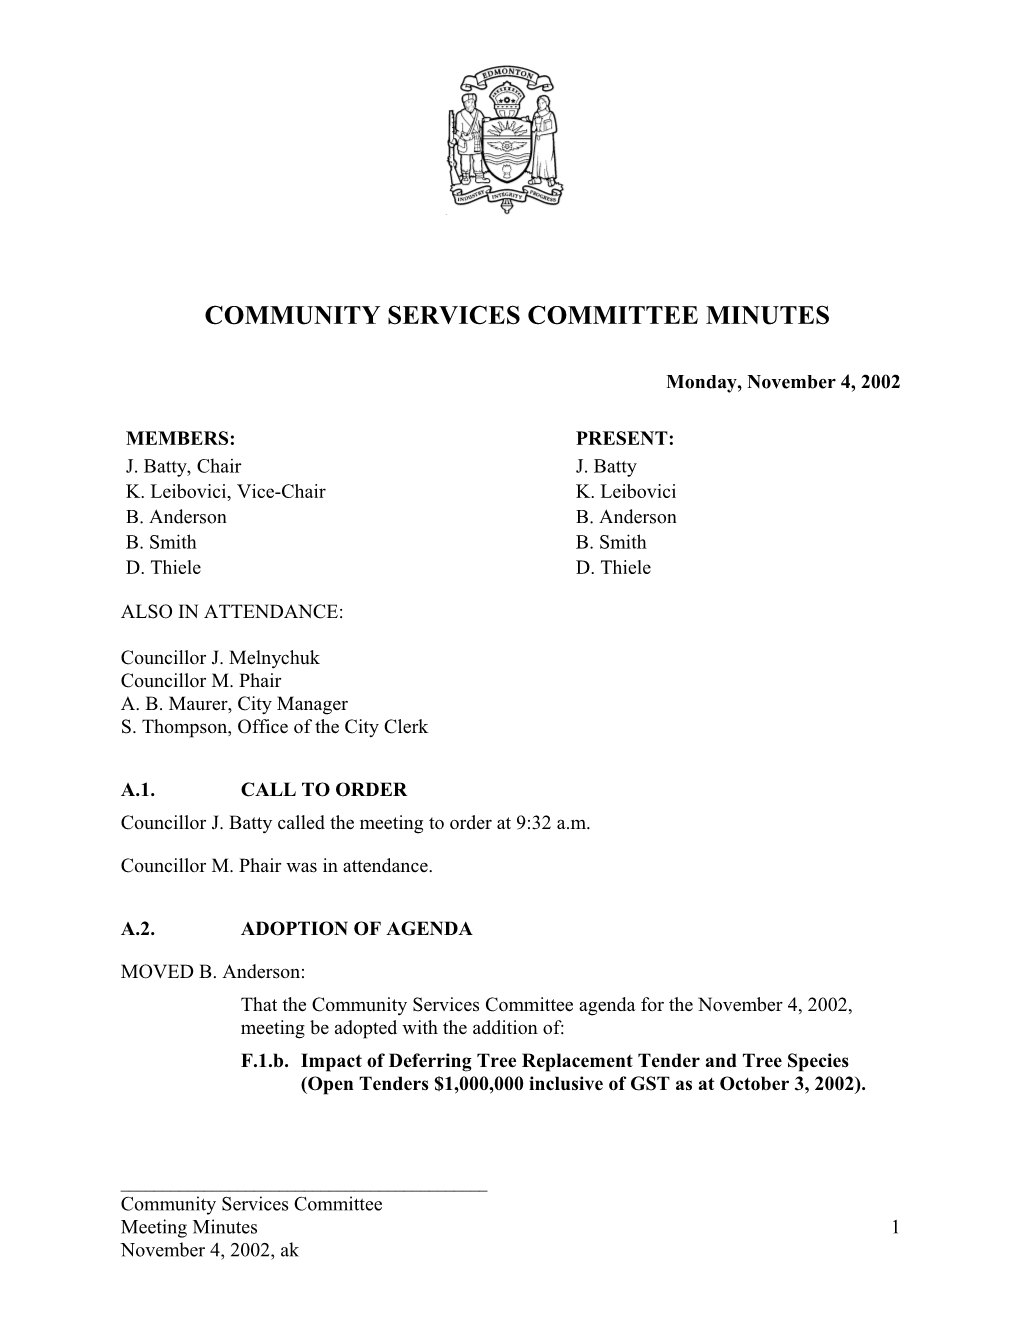 Minutes for Community Services Committee November 4, 2002 Meeting